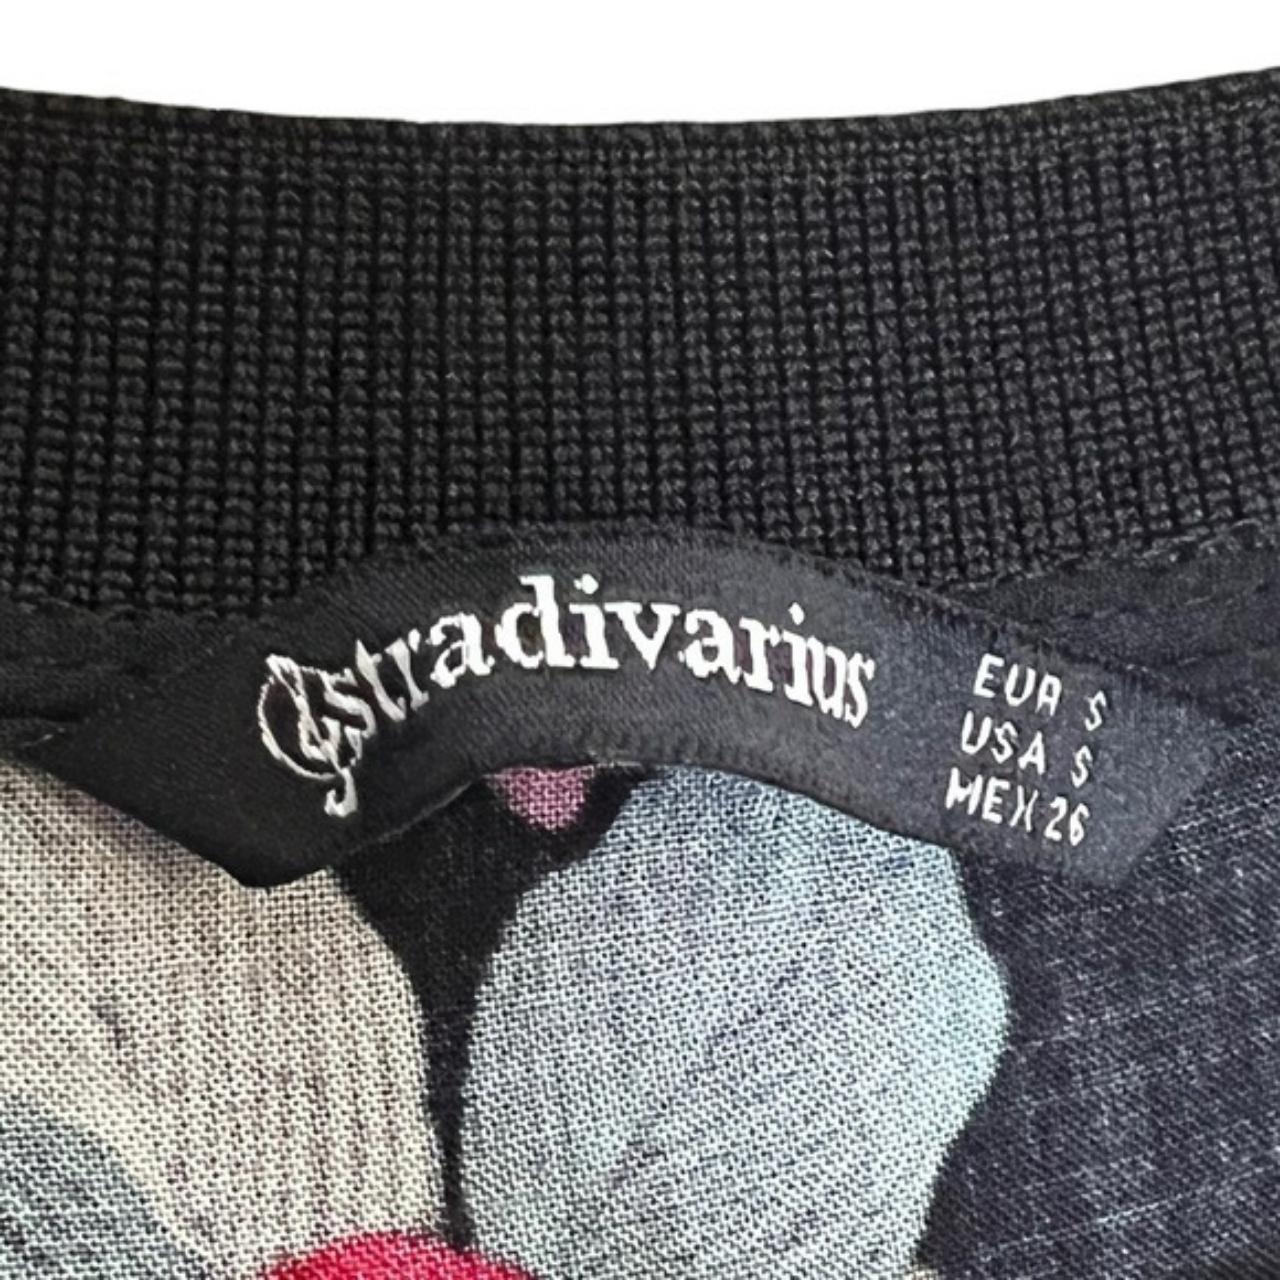 Product Image 4 - Excellent condition Stradivarius top. Lightweight,